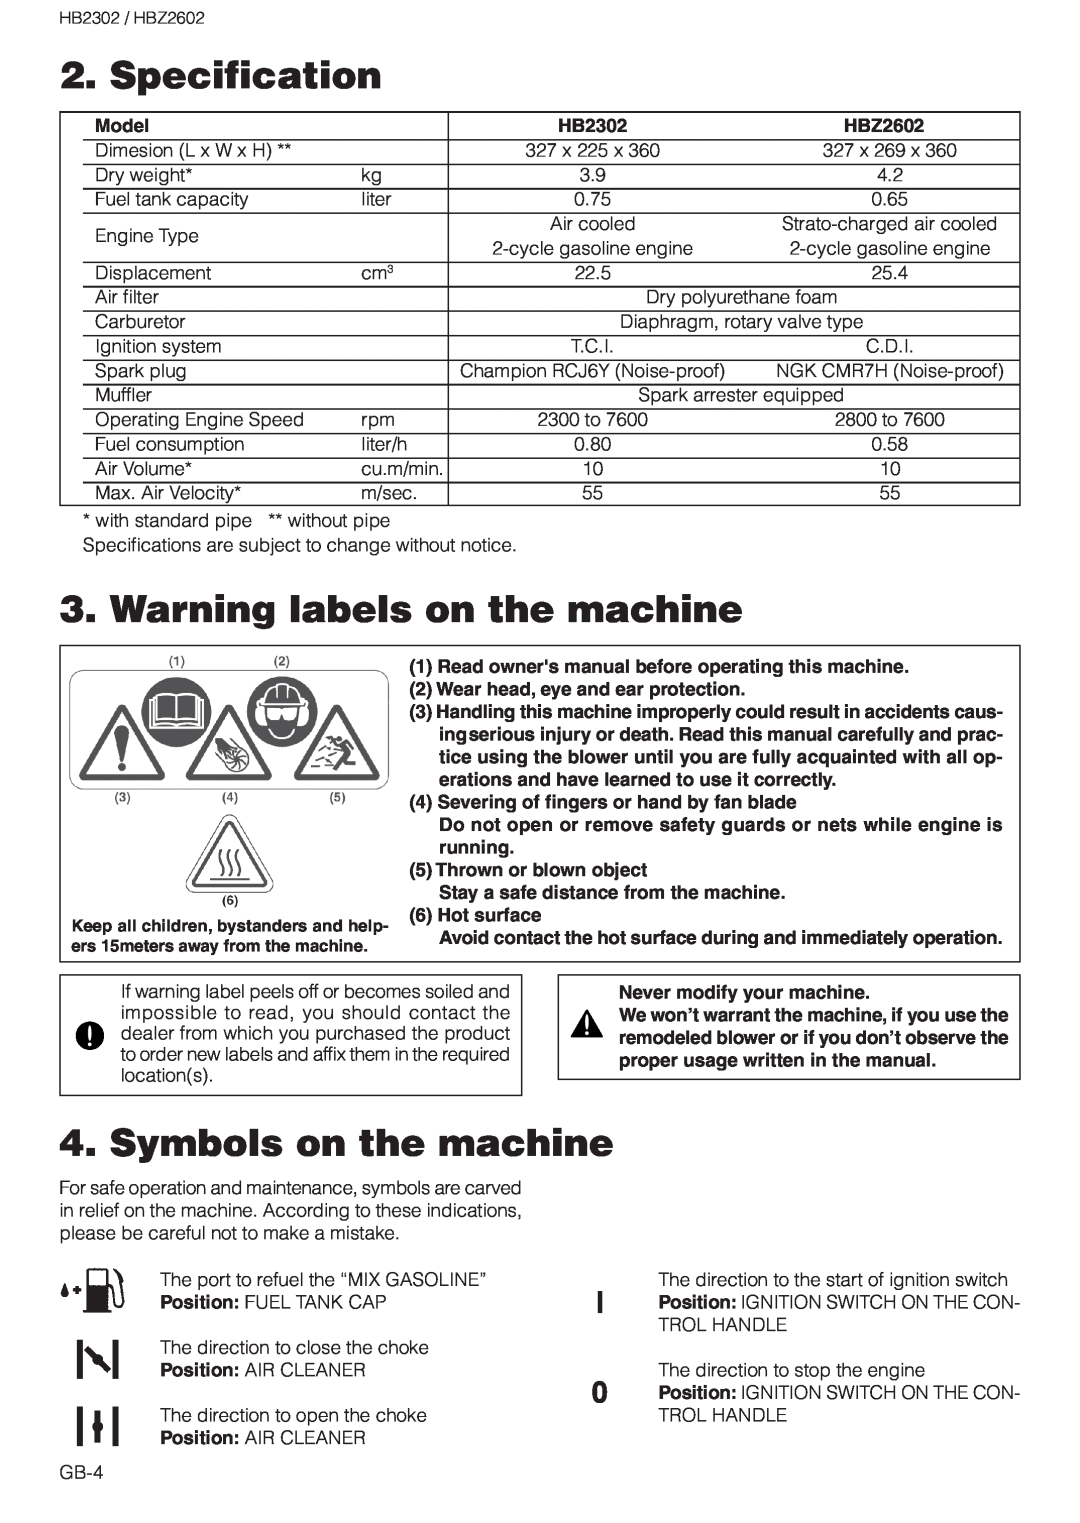 Zenoah HBZ2602 Specification, Warning labels on the machine, Symbols on the machine, Model, HB2302, Hot surface 